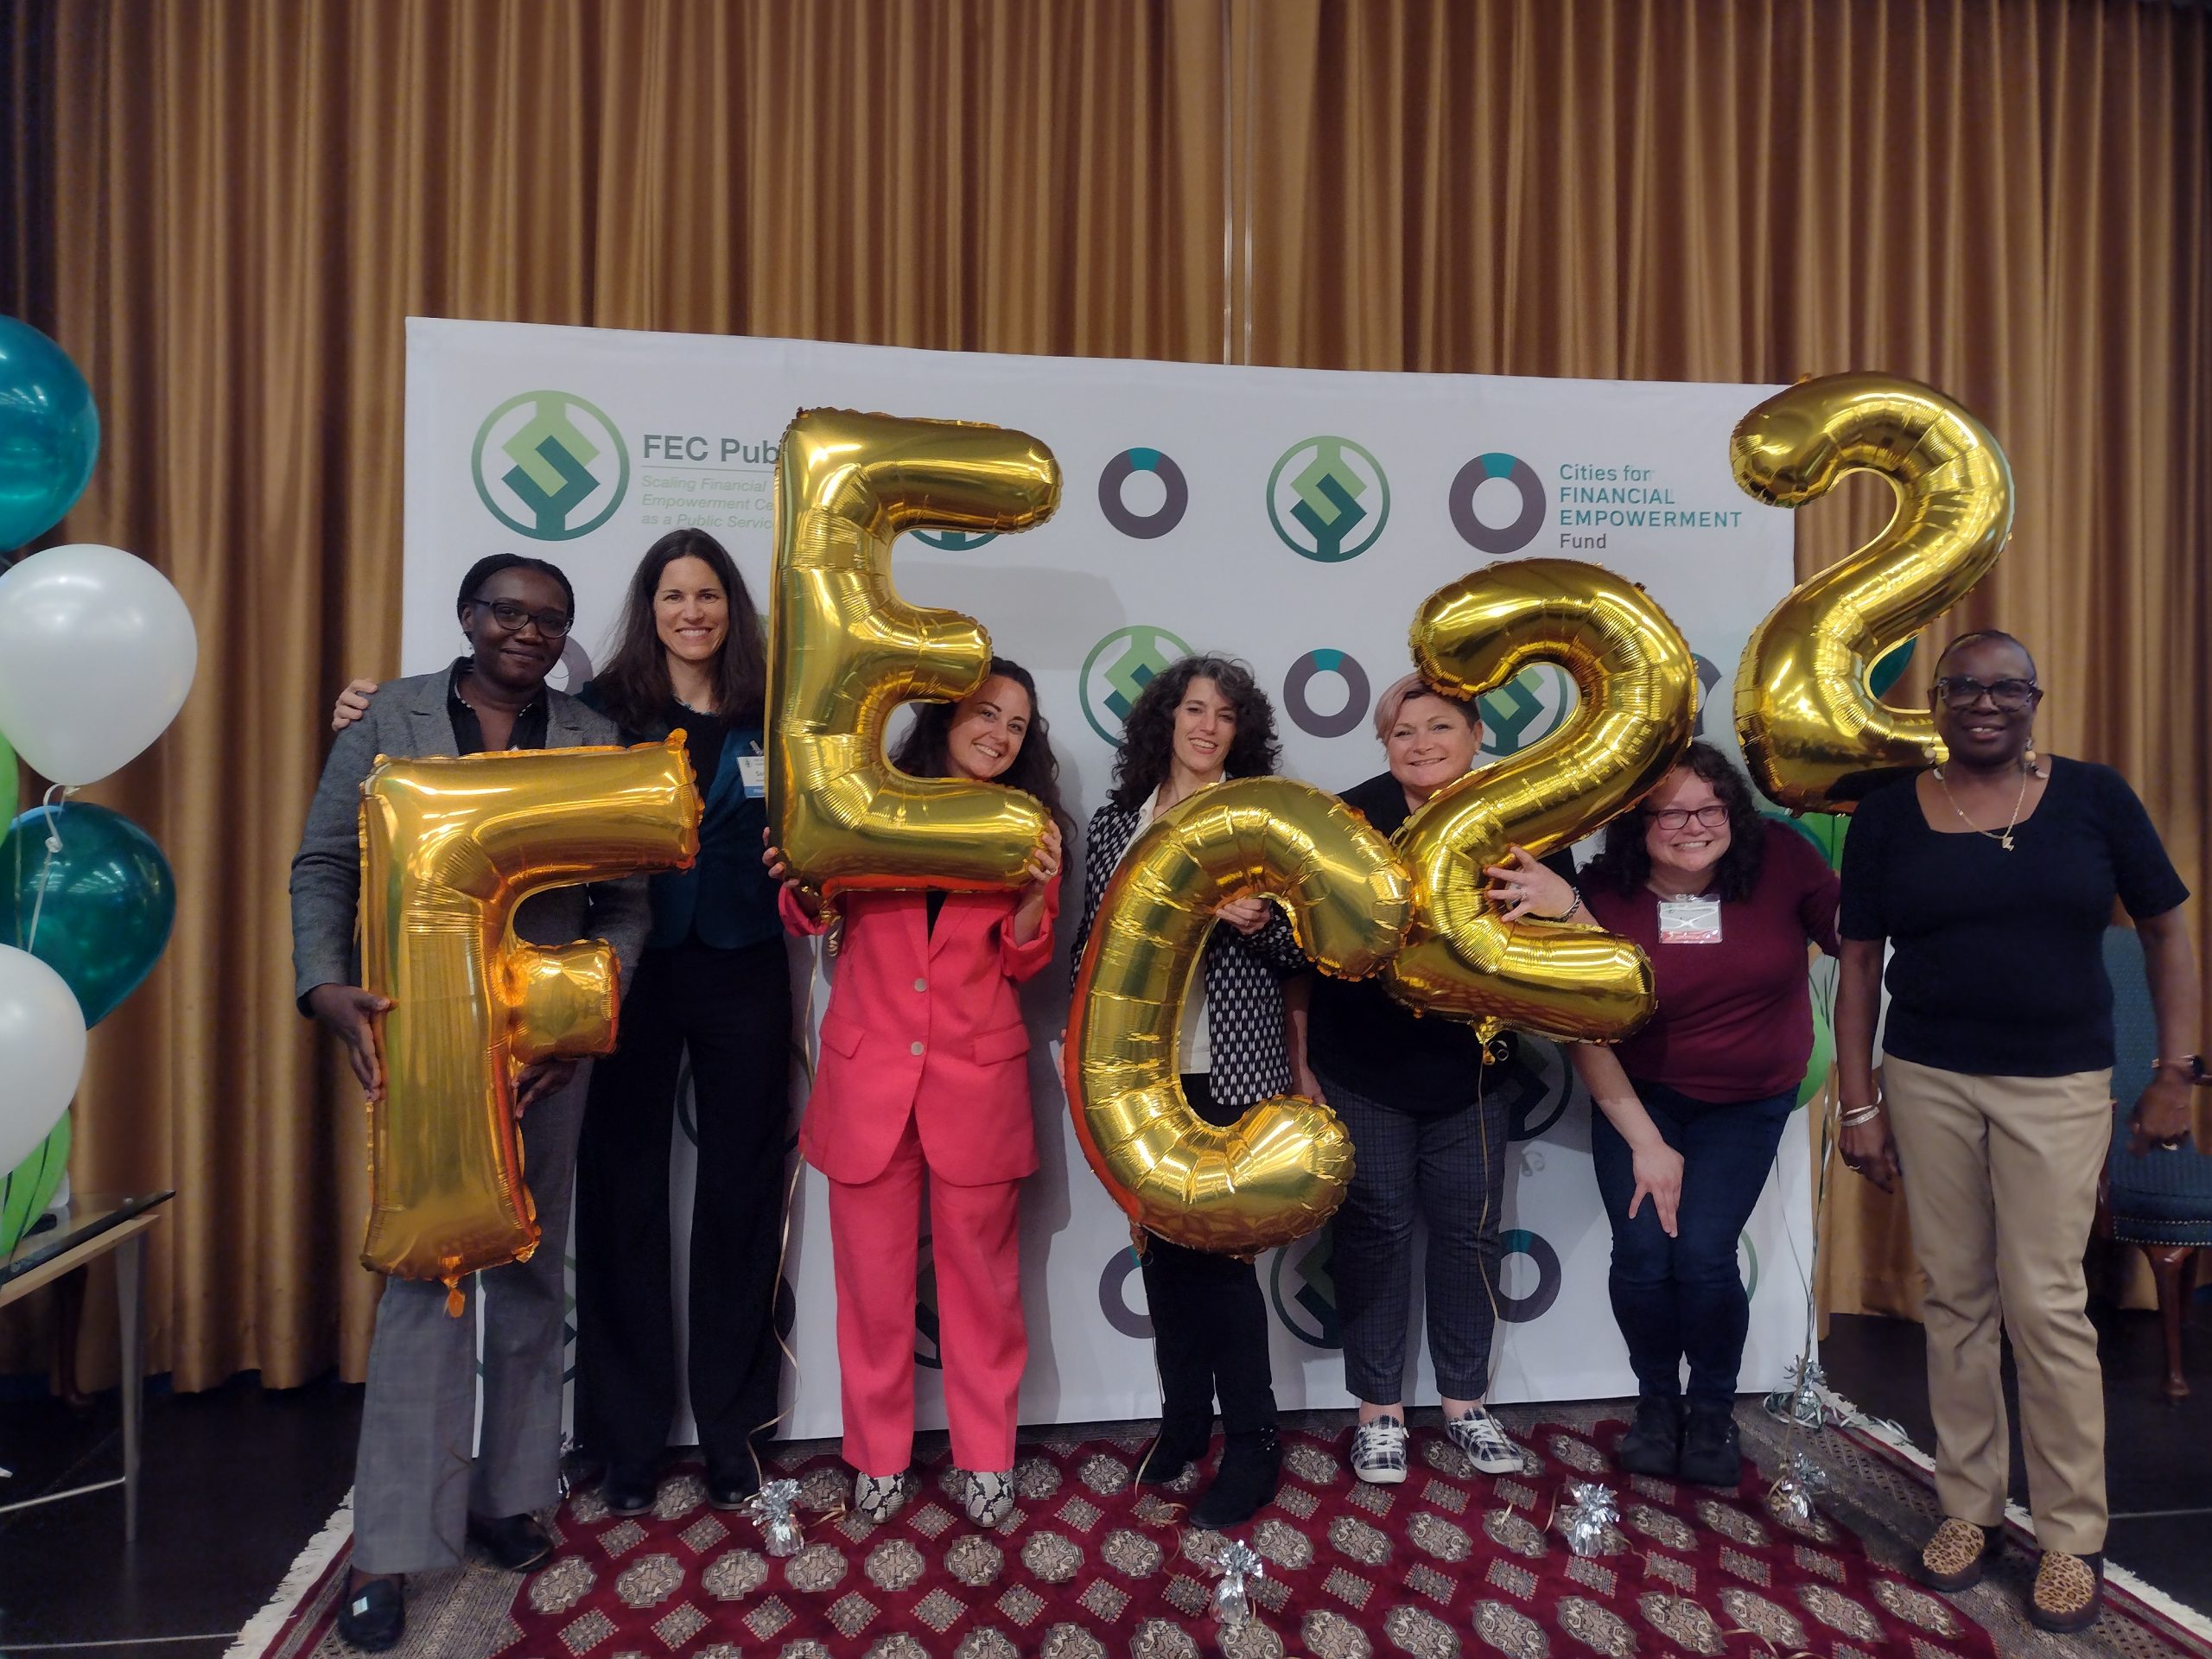 Image of our 5 Financial Empowerment Center (FEC) counselors and the Director of the FEC (all are women) with Sarah, our Director of Economic Opportunity. They all stand in front of a backdrop with the green FEC logo. They hold gold, shiny balloons that spell out "FEC 22." They are all smiling.